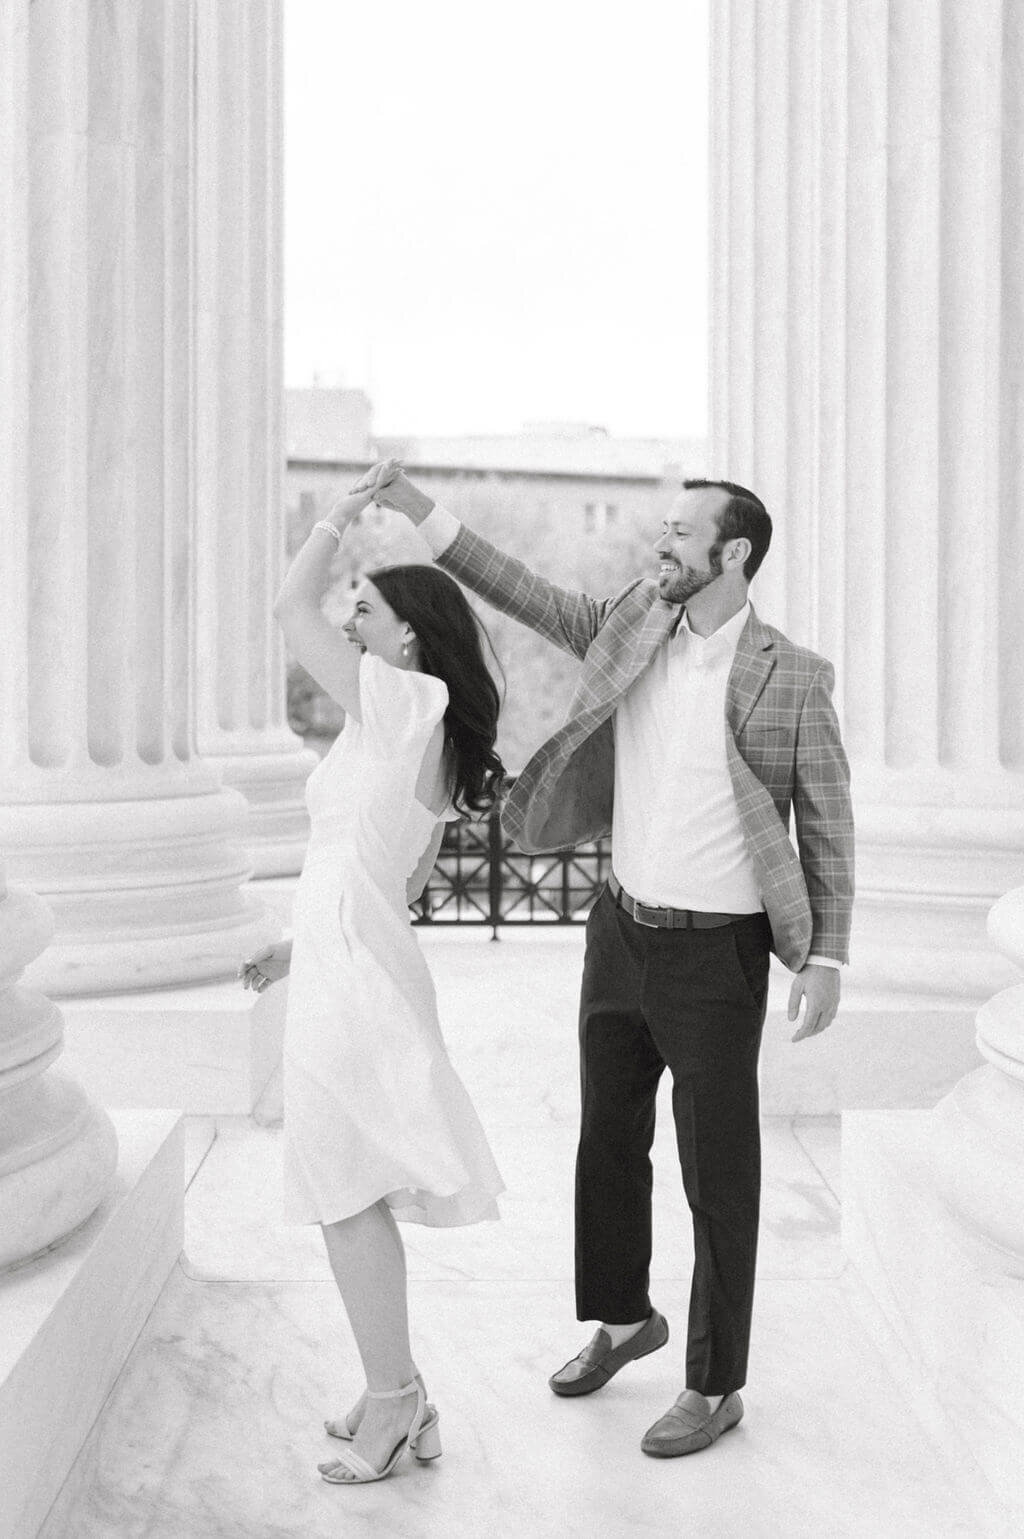 B&W image of a couple dancing together in between columns at the US Supreme Court